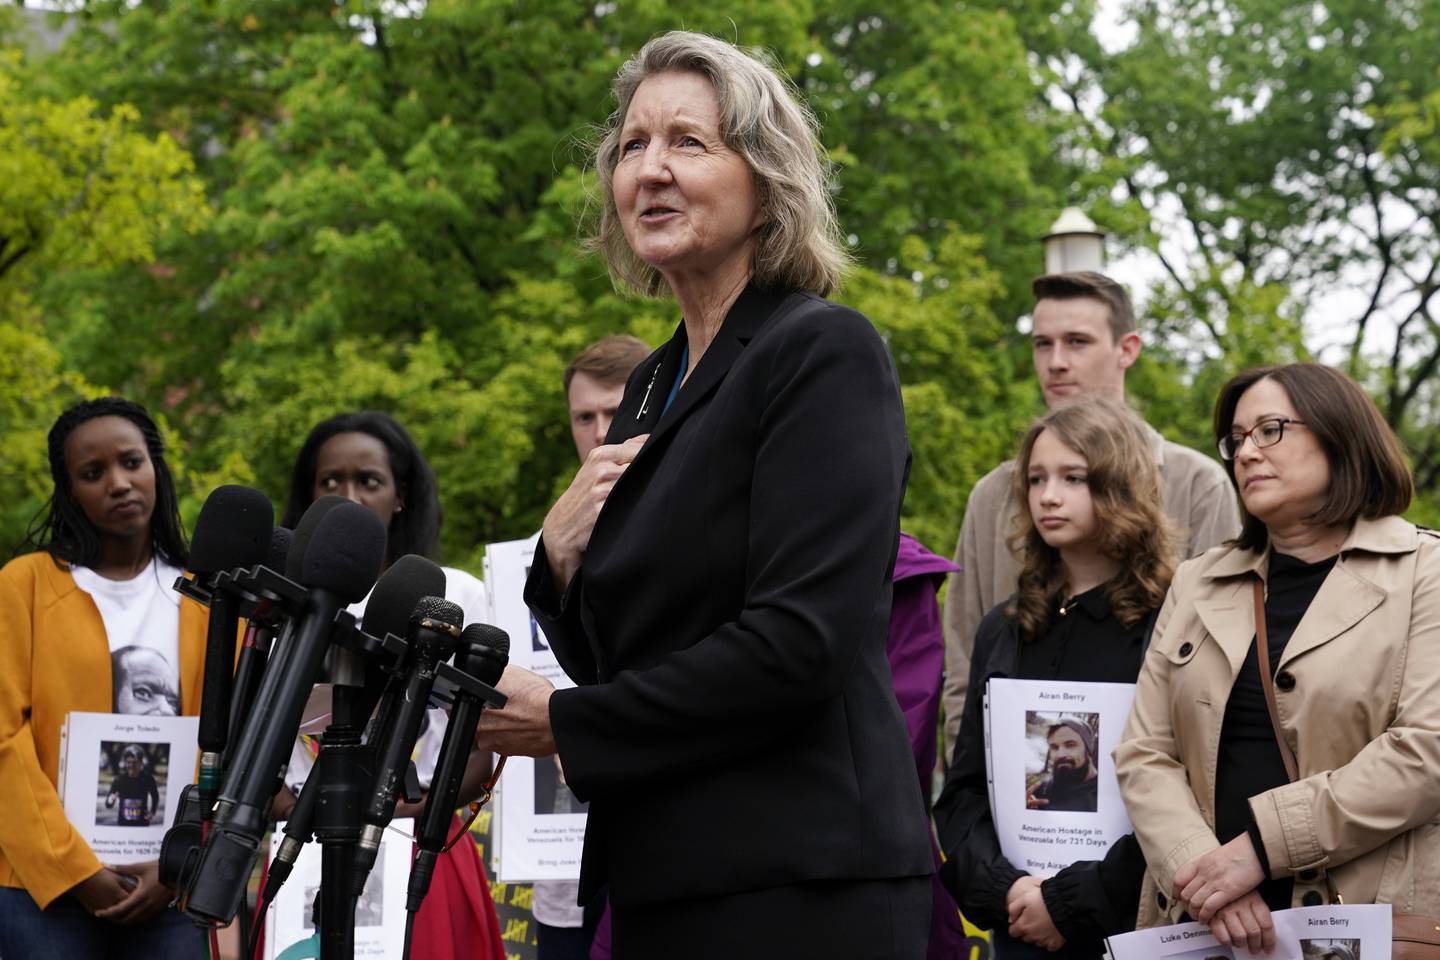 Elizabeth Whelan, sister of U.S. Marine Corps veteran and Russian prisoner Paul Whelan, speaks at a news conference alongside families of Americans currently being held hostage or wrongfully detained overseas in Lafayette Park near the White House, May 4, 2022, in Washington.